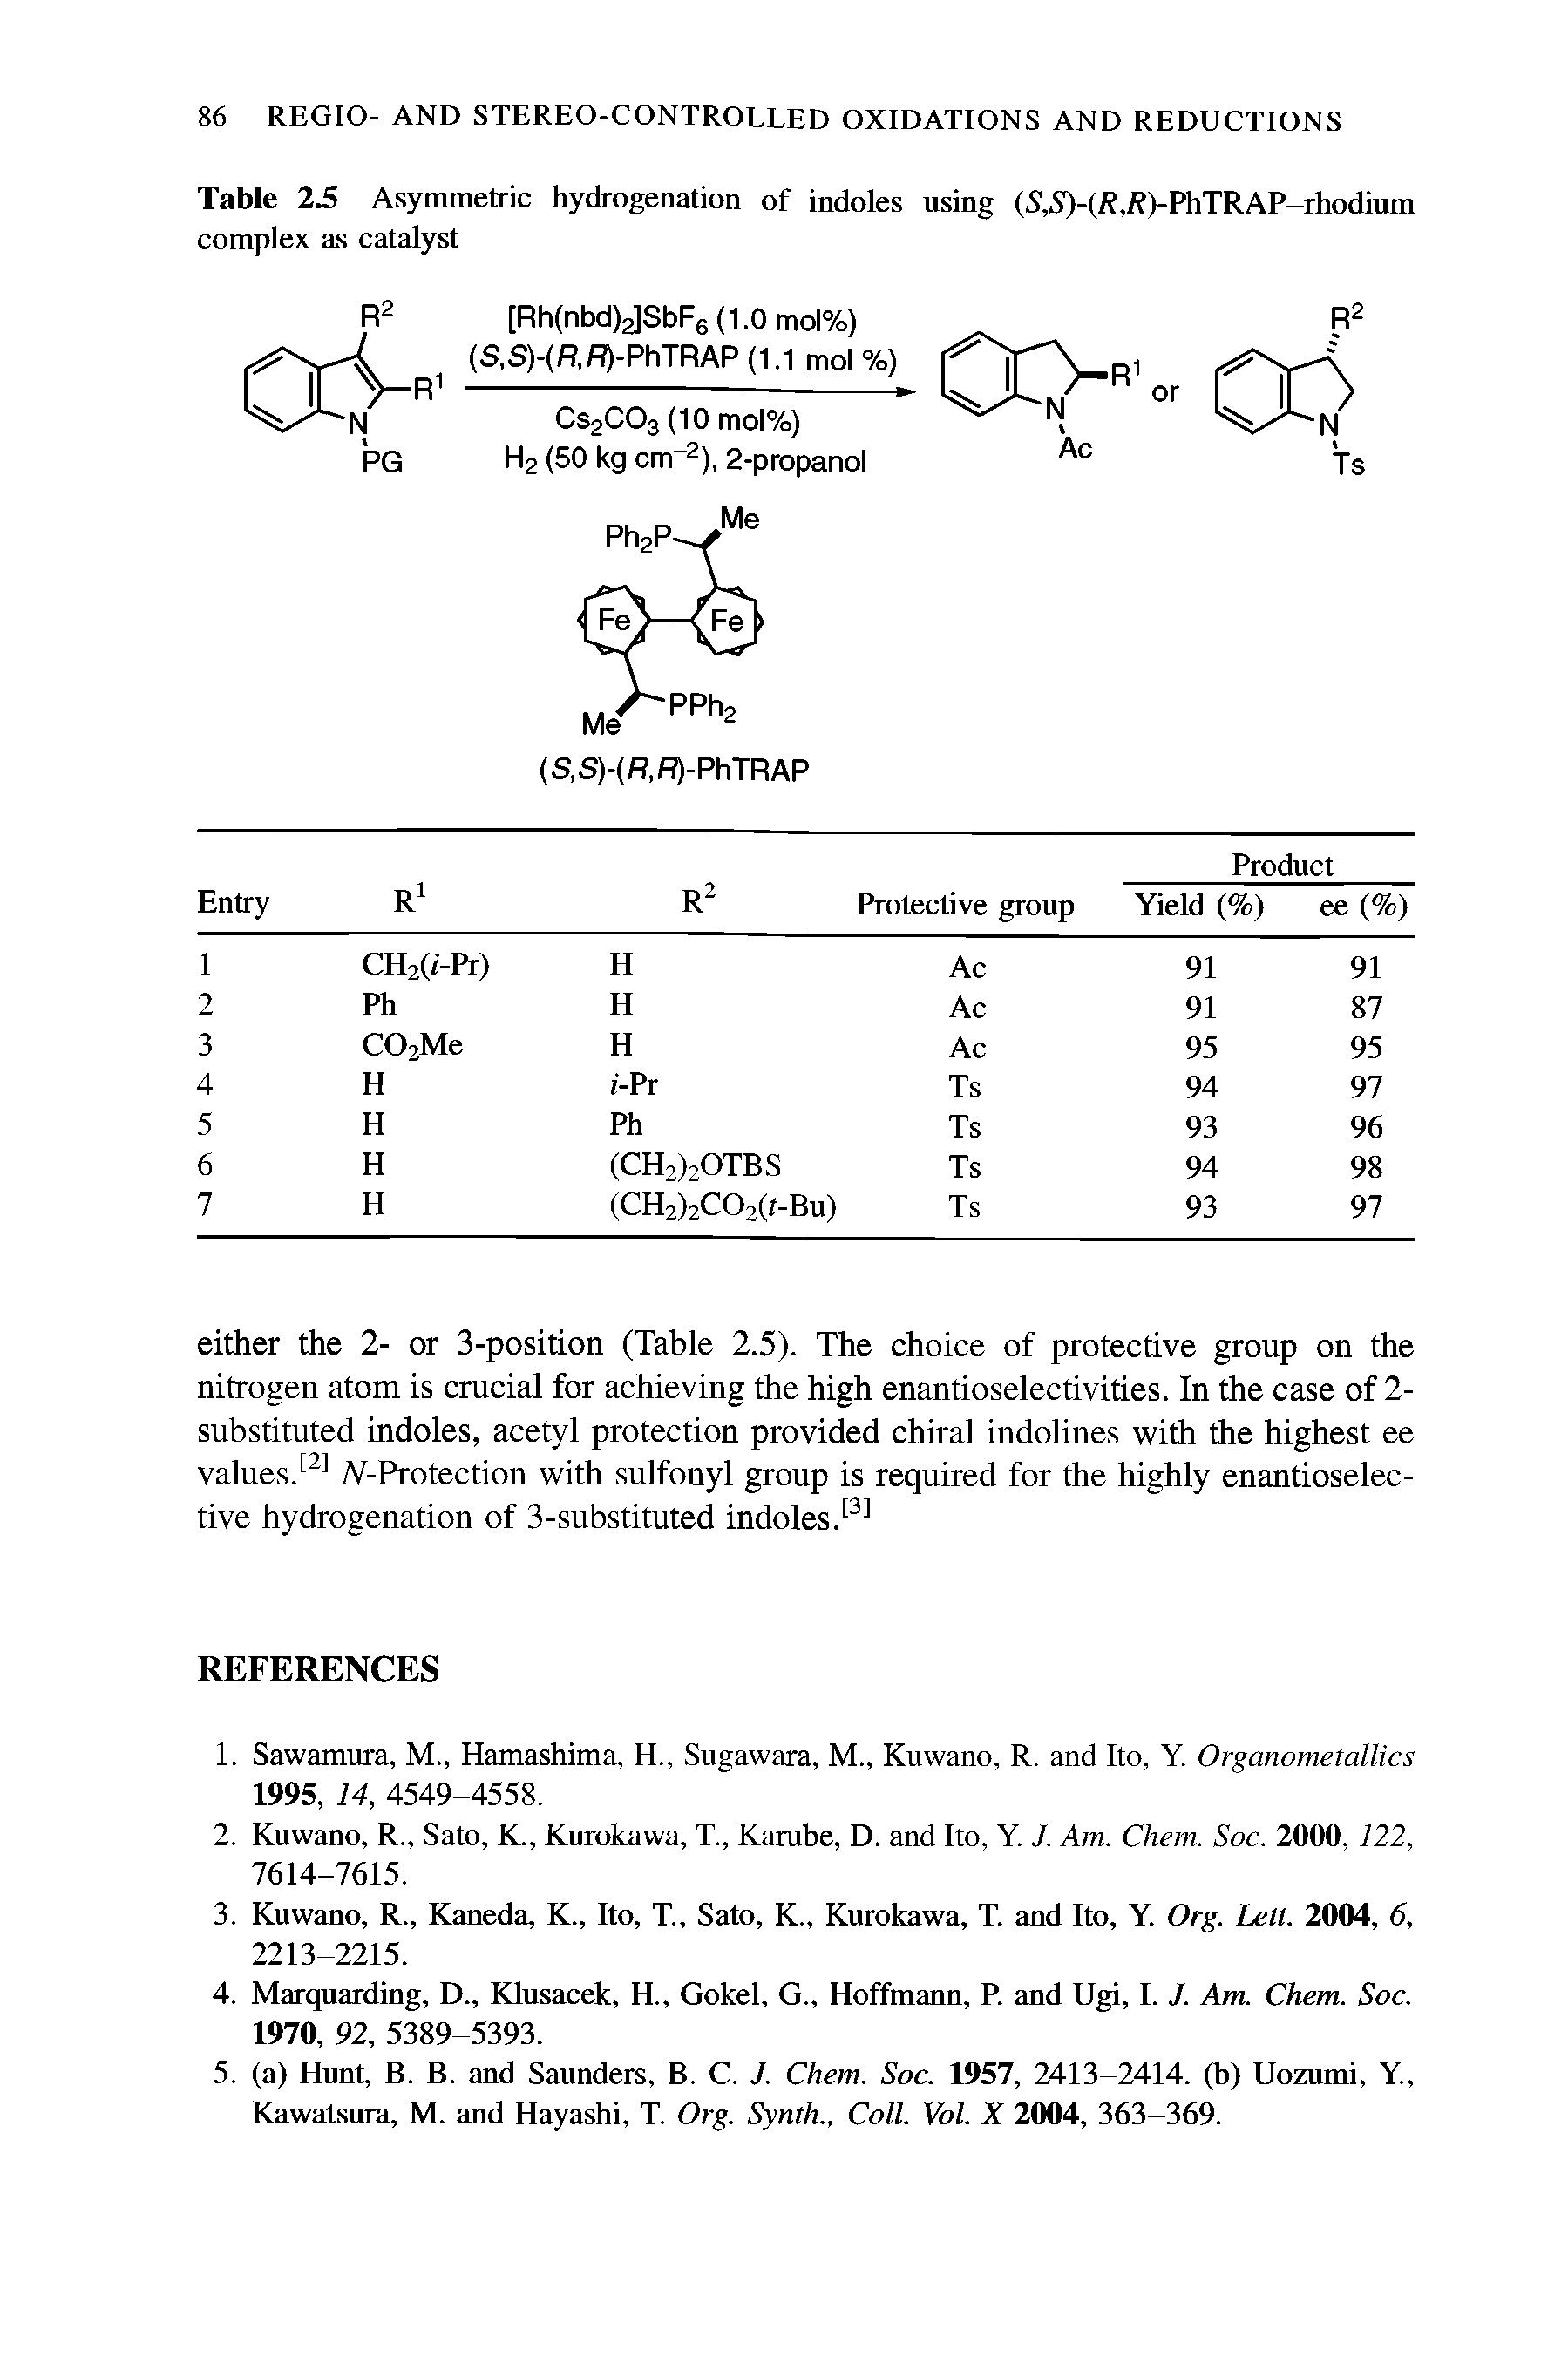 Table 2.5 Asymmetric hydrogenation of indoles using (S,S)-(I ,I )-PhTRAP-rhodium complex as catalyst...